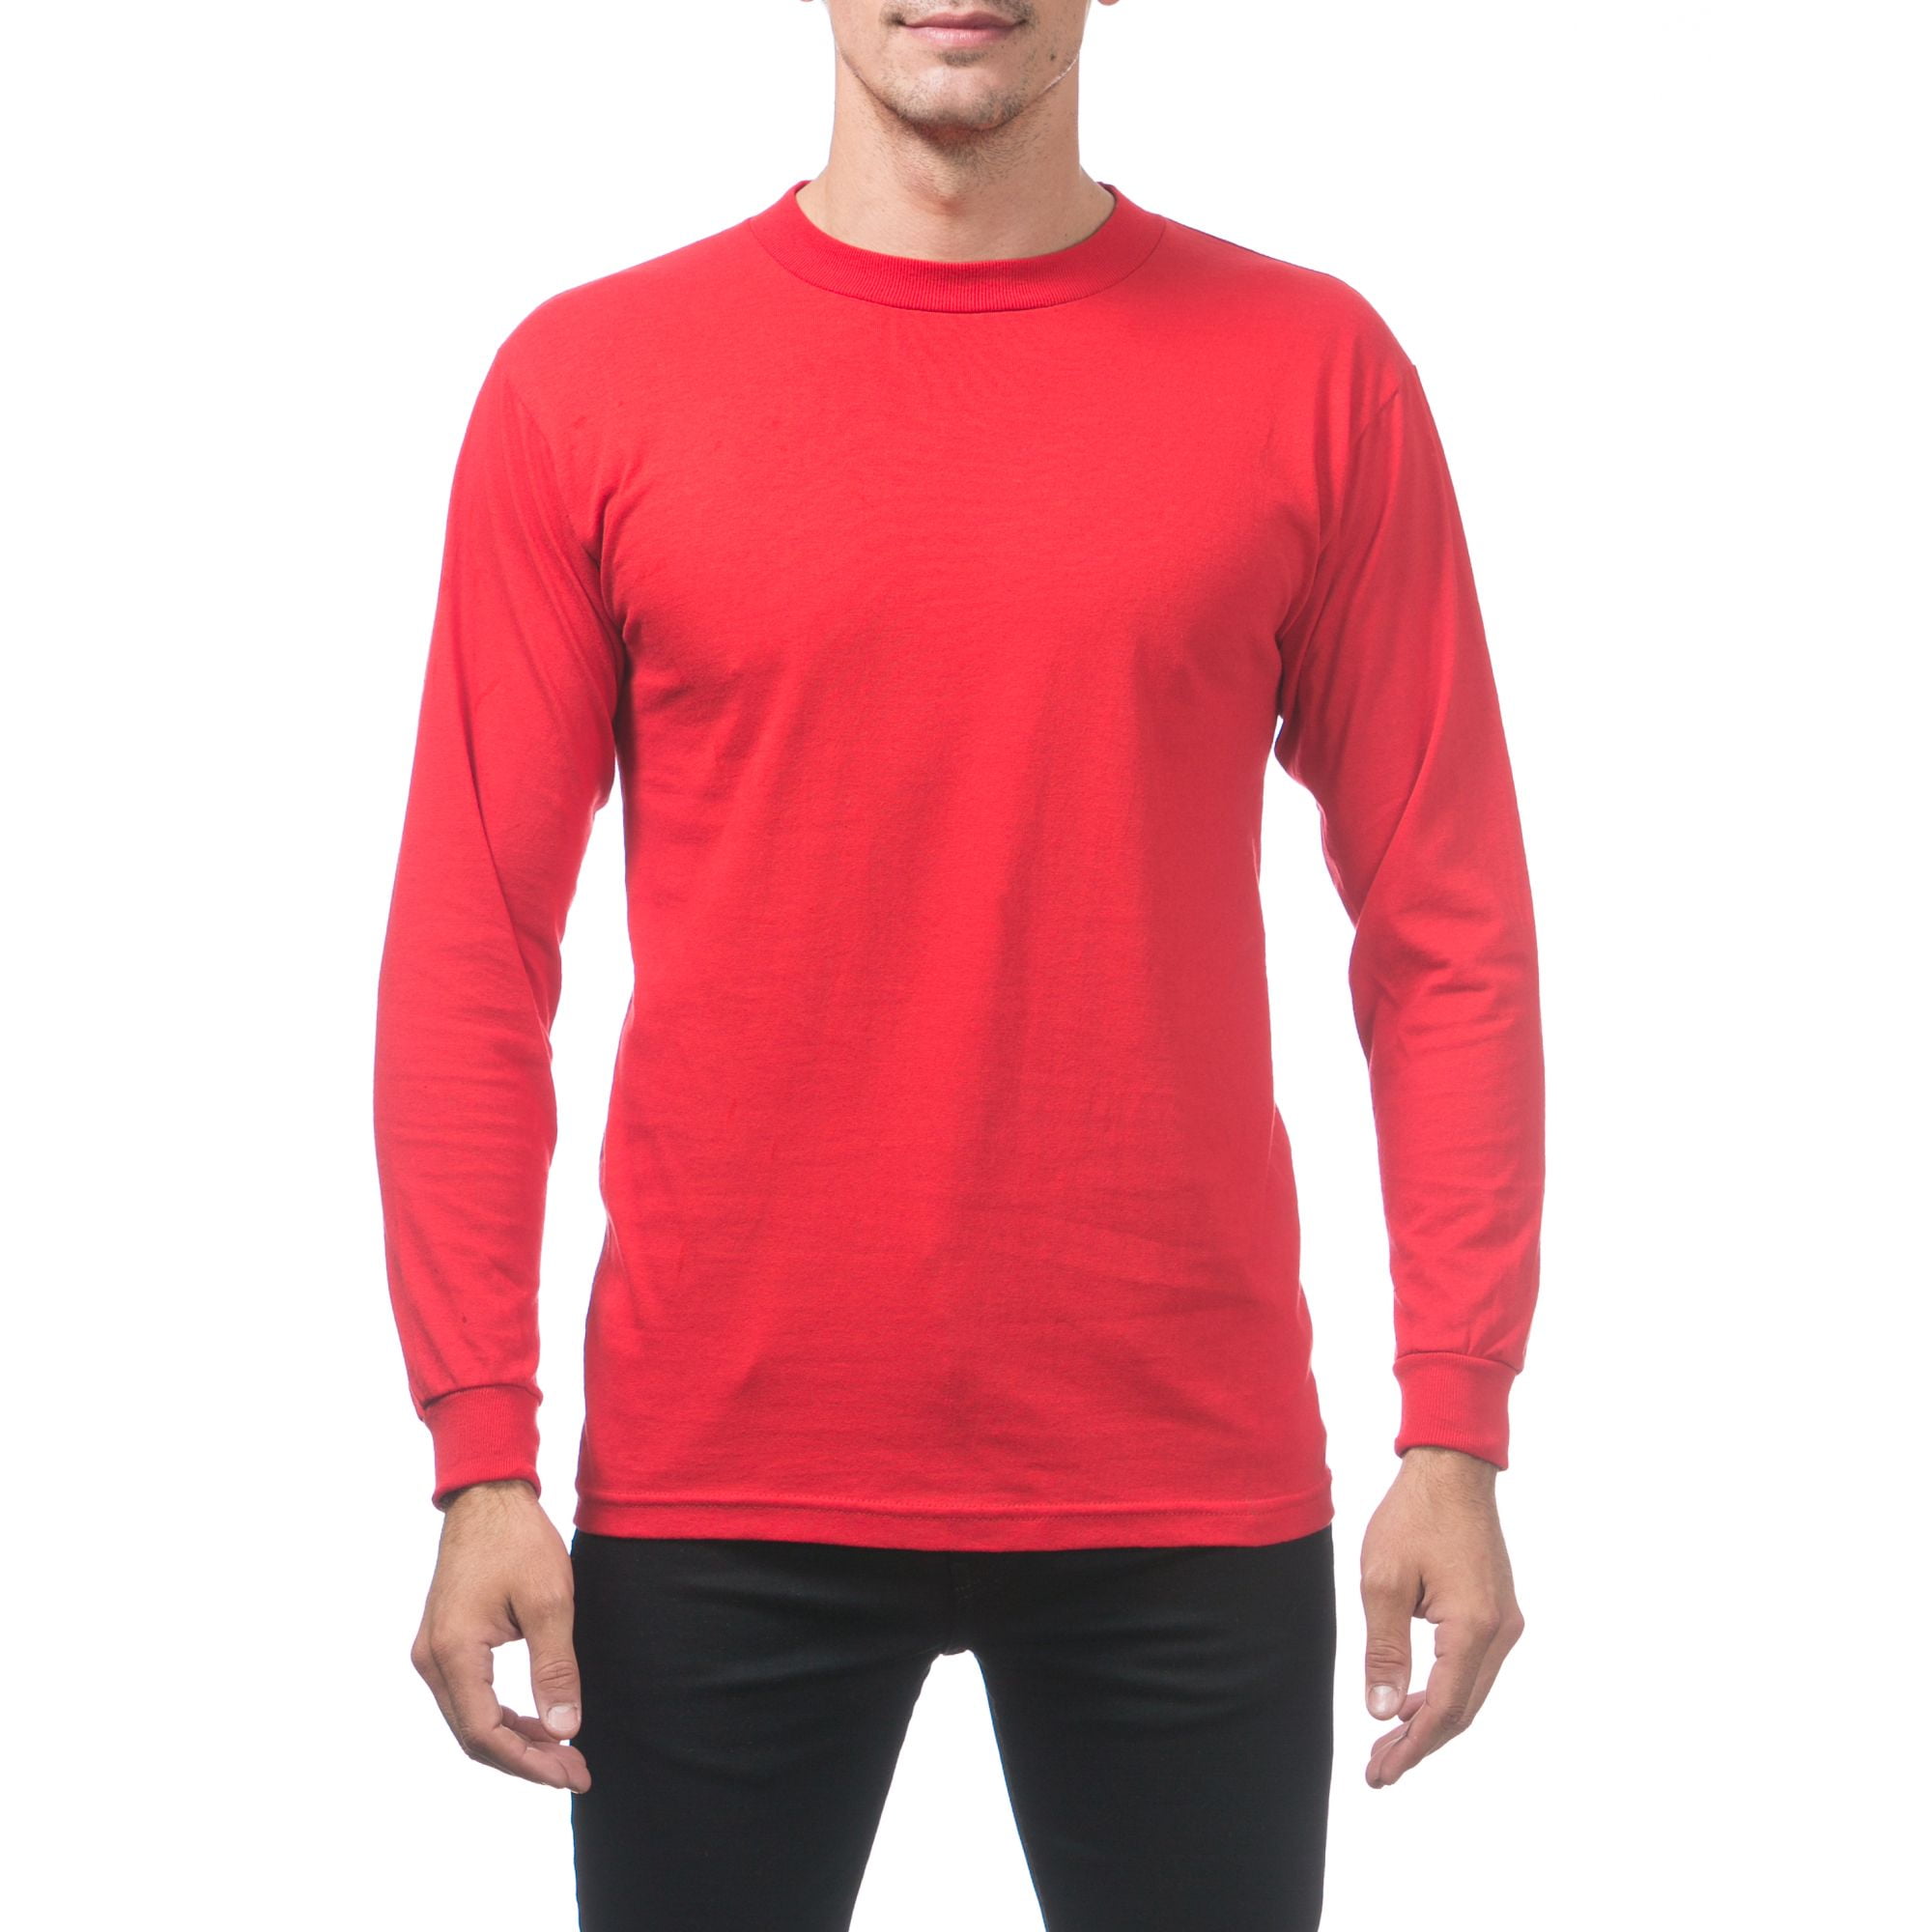 long sleeve red